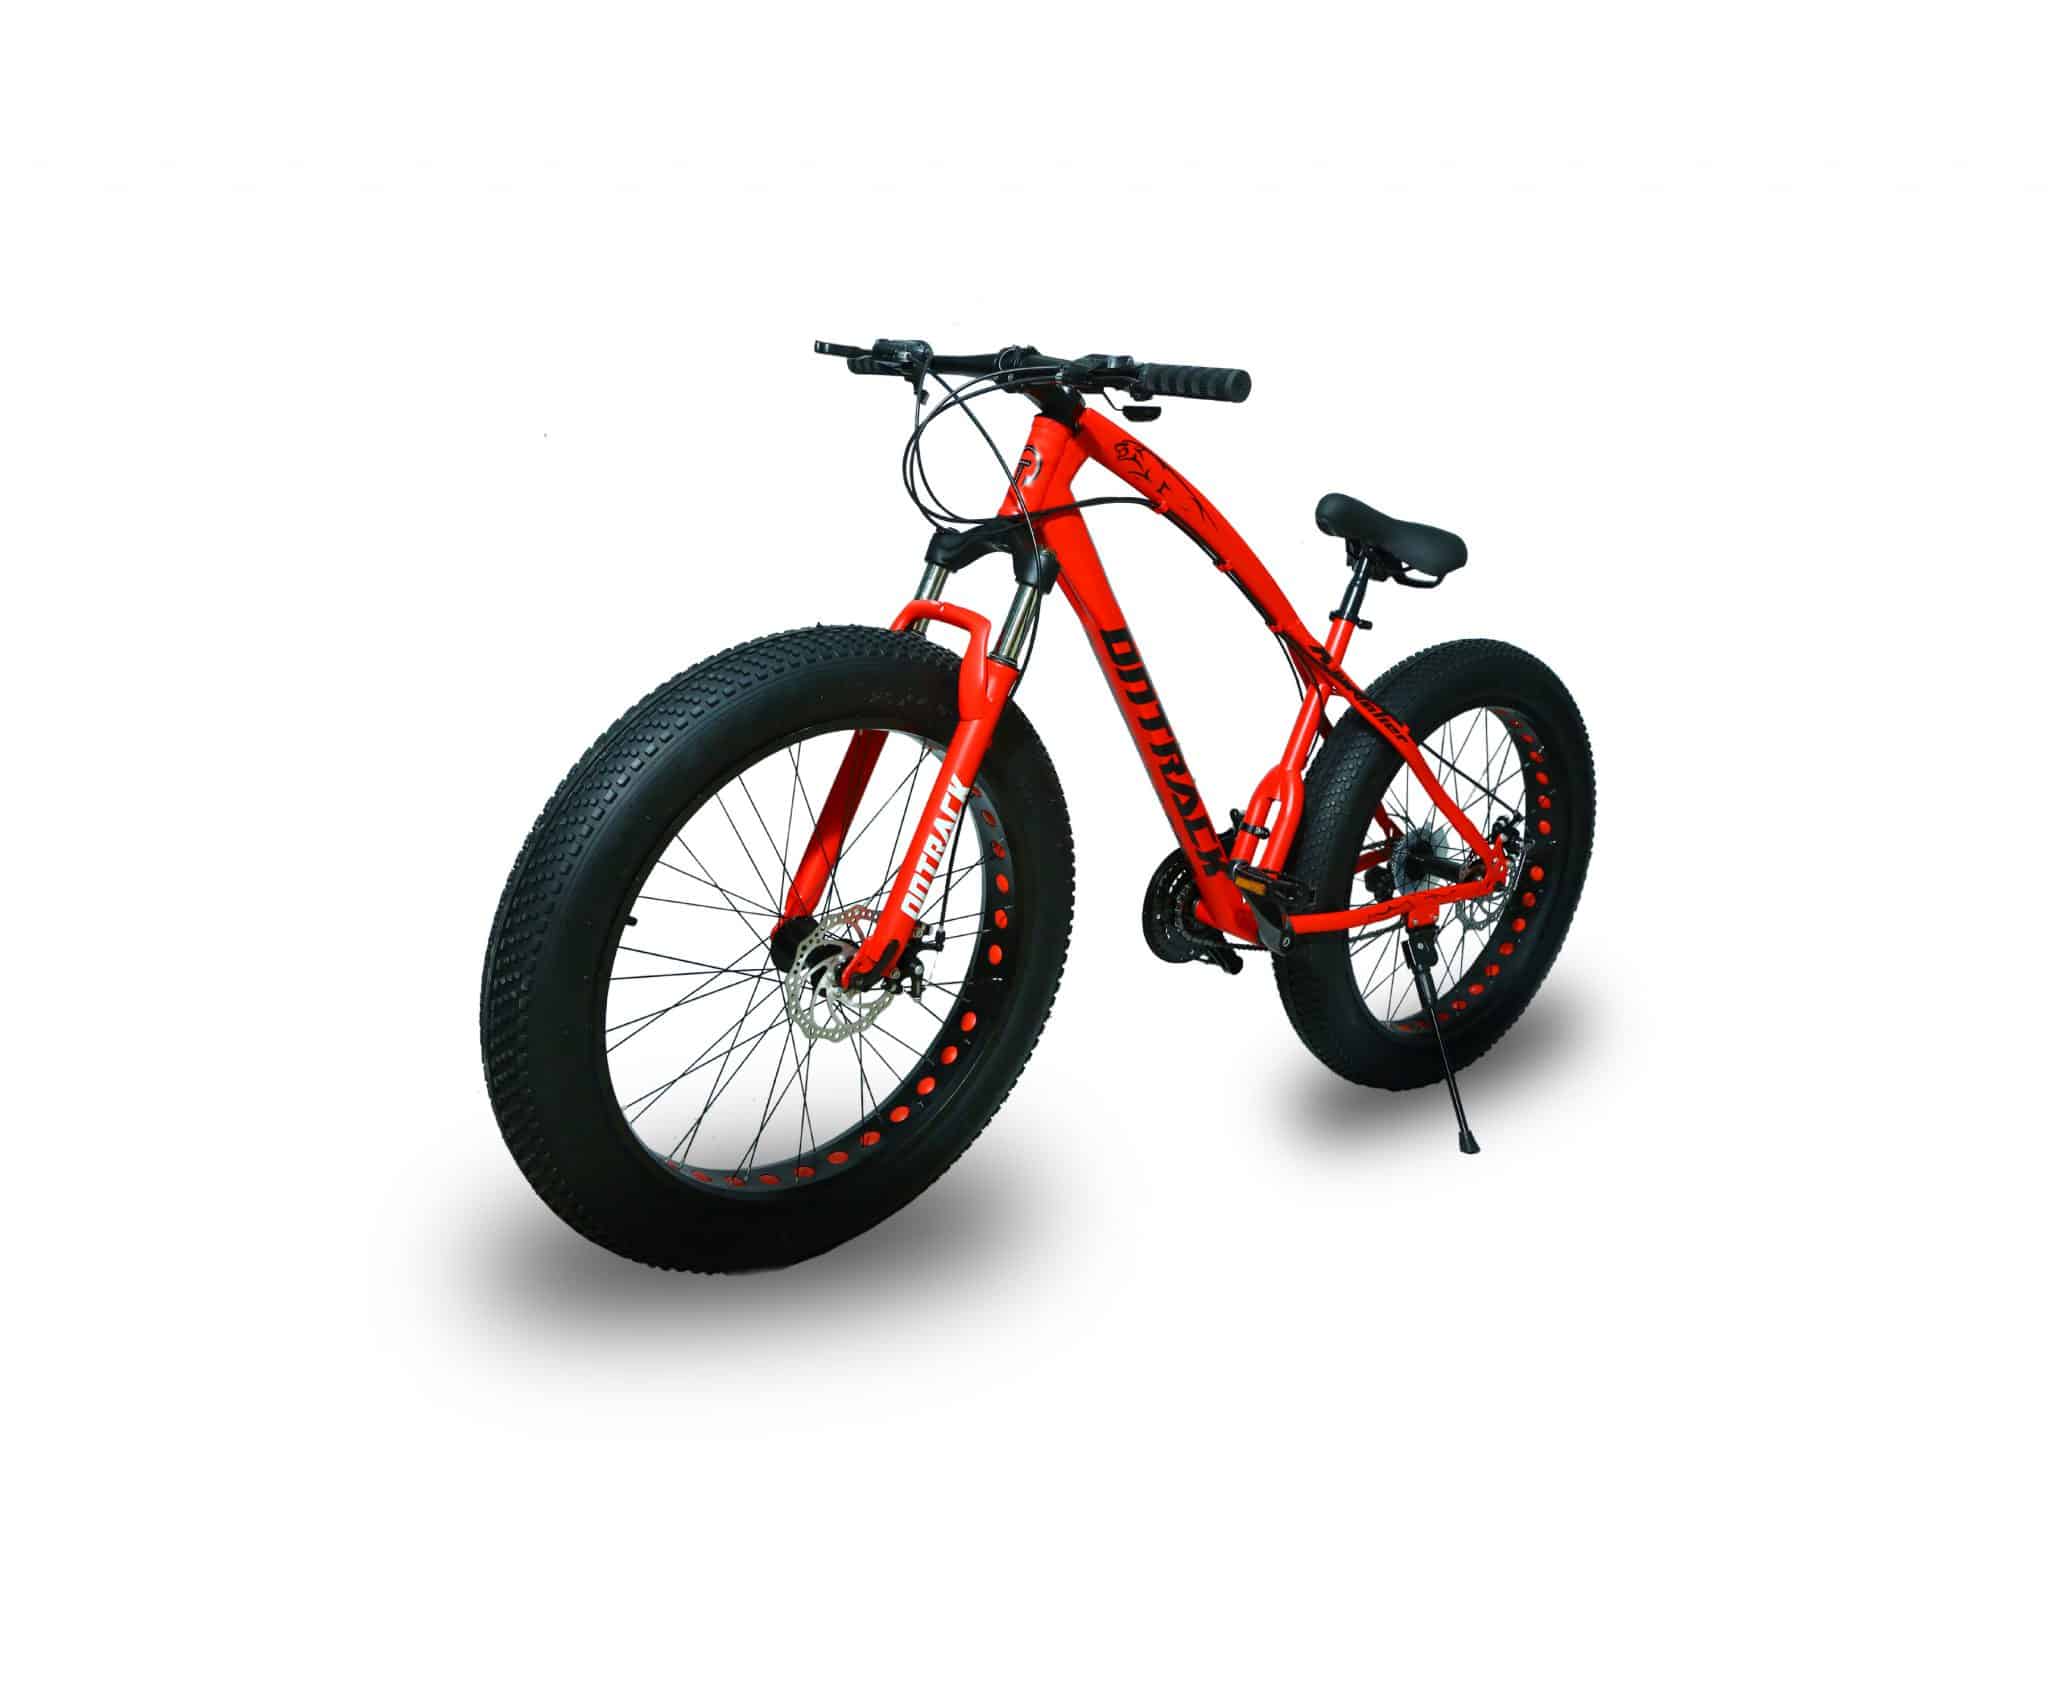 NEW Ontrack Fat Bikes in India 2019 #GOOD SUSPENSION | Ontrack